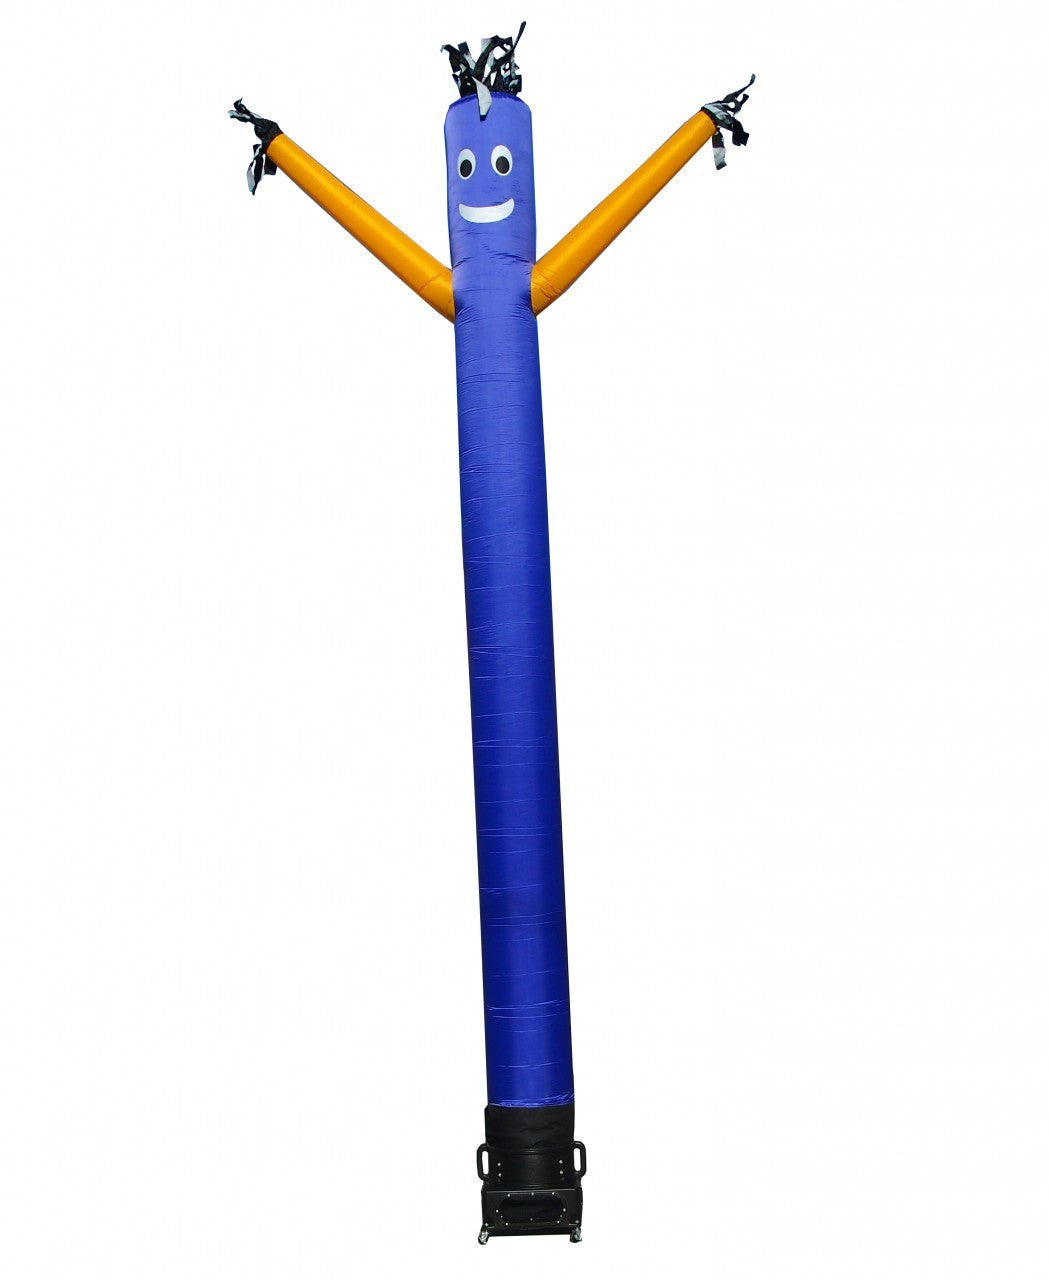 20ft Blue with Yellow Arms Air Dancer Inflatable Tube Man